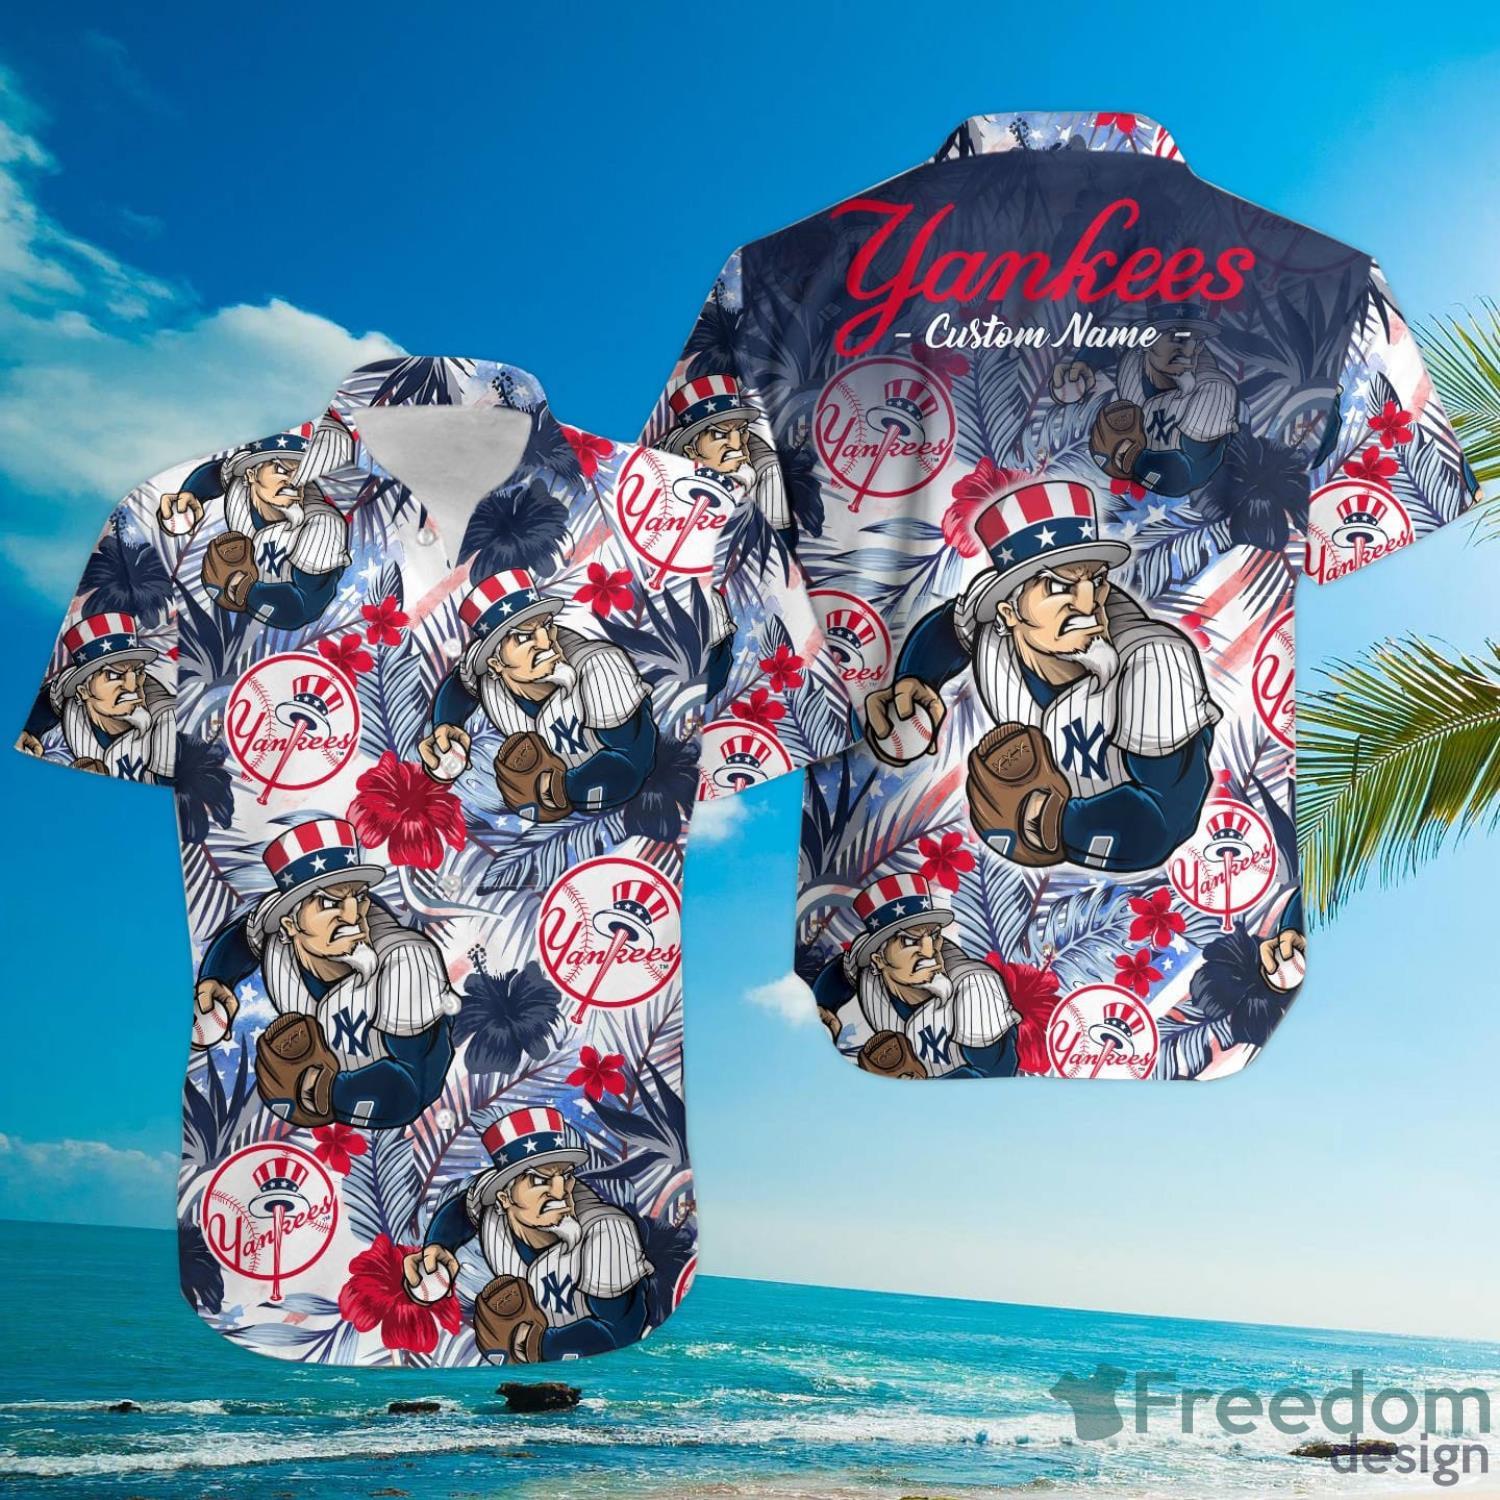 New York Yankees Tropical Floral Button Shirt - Reallgraphics